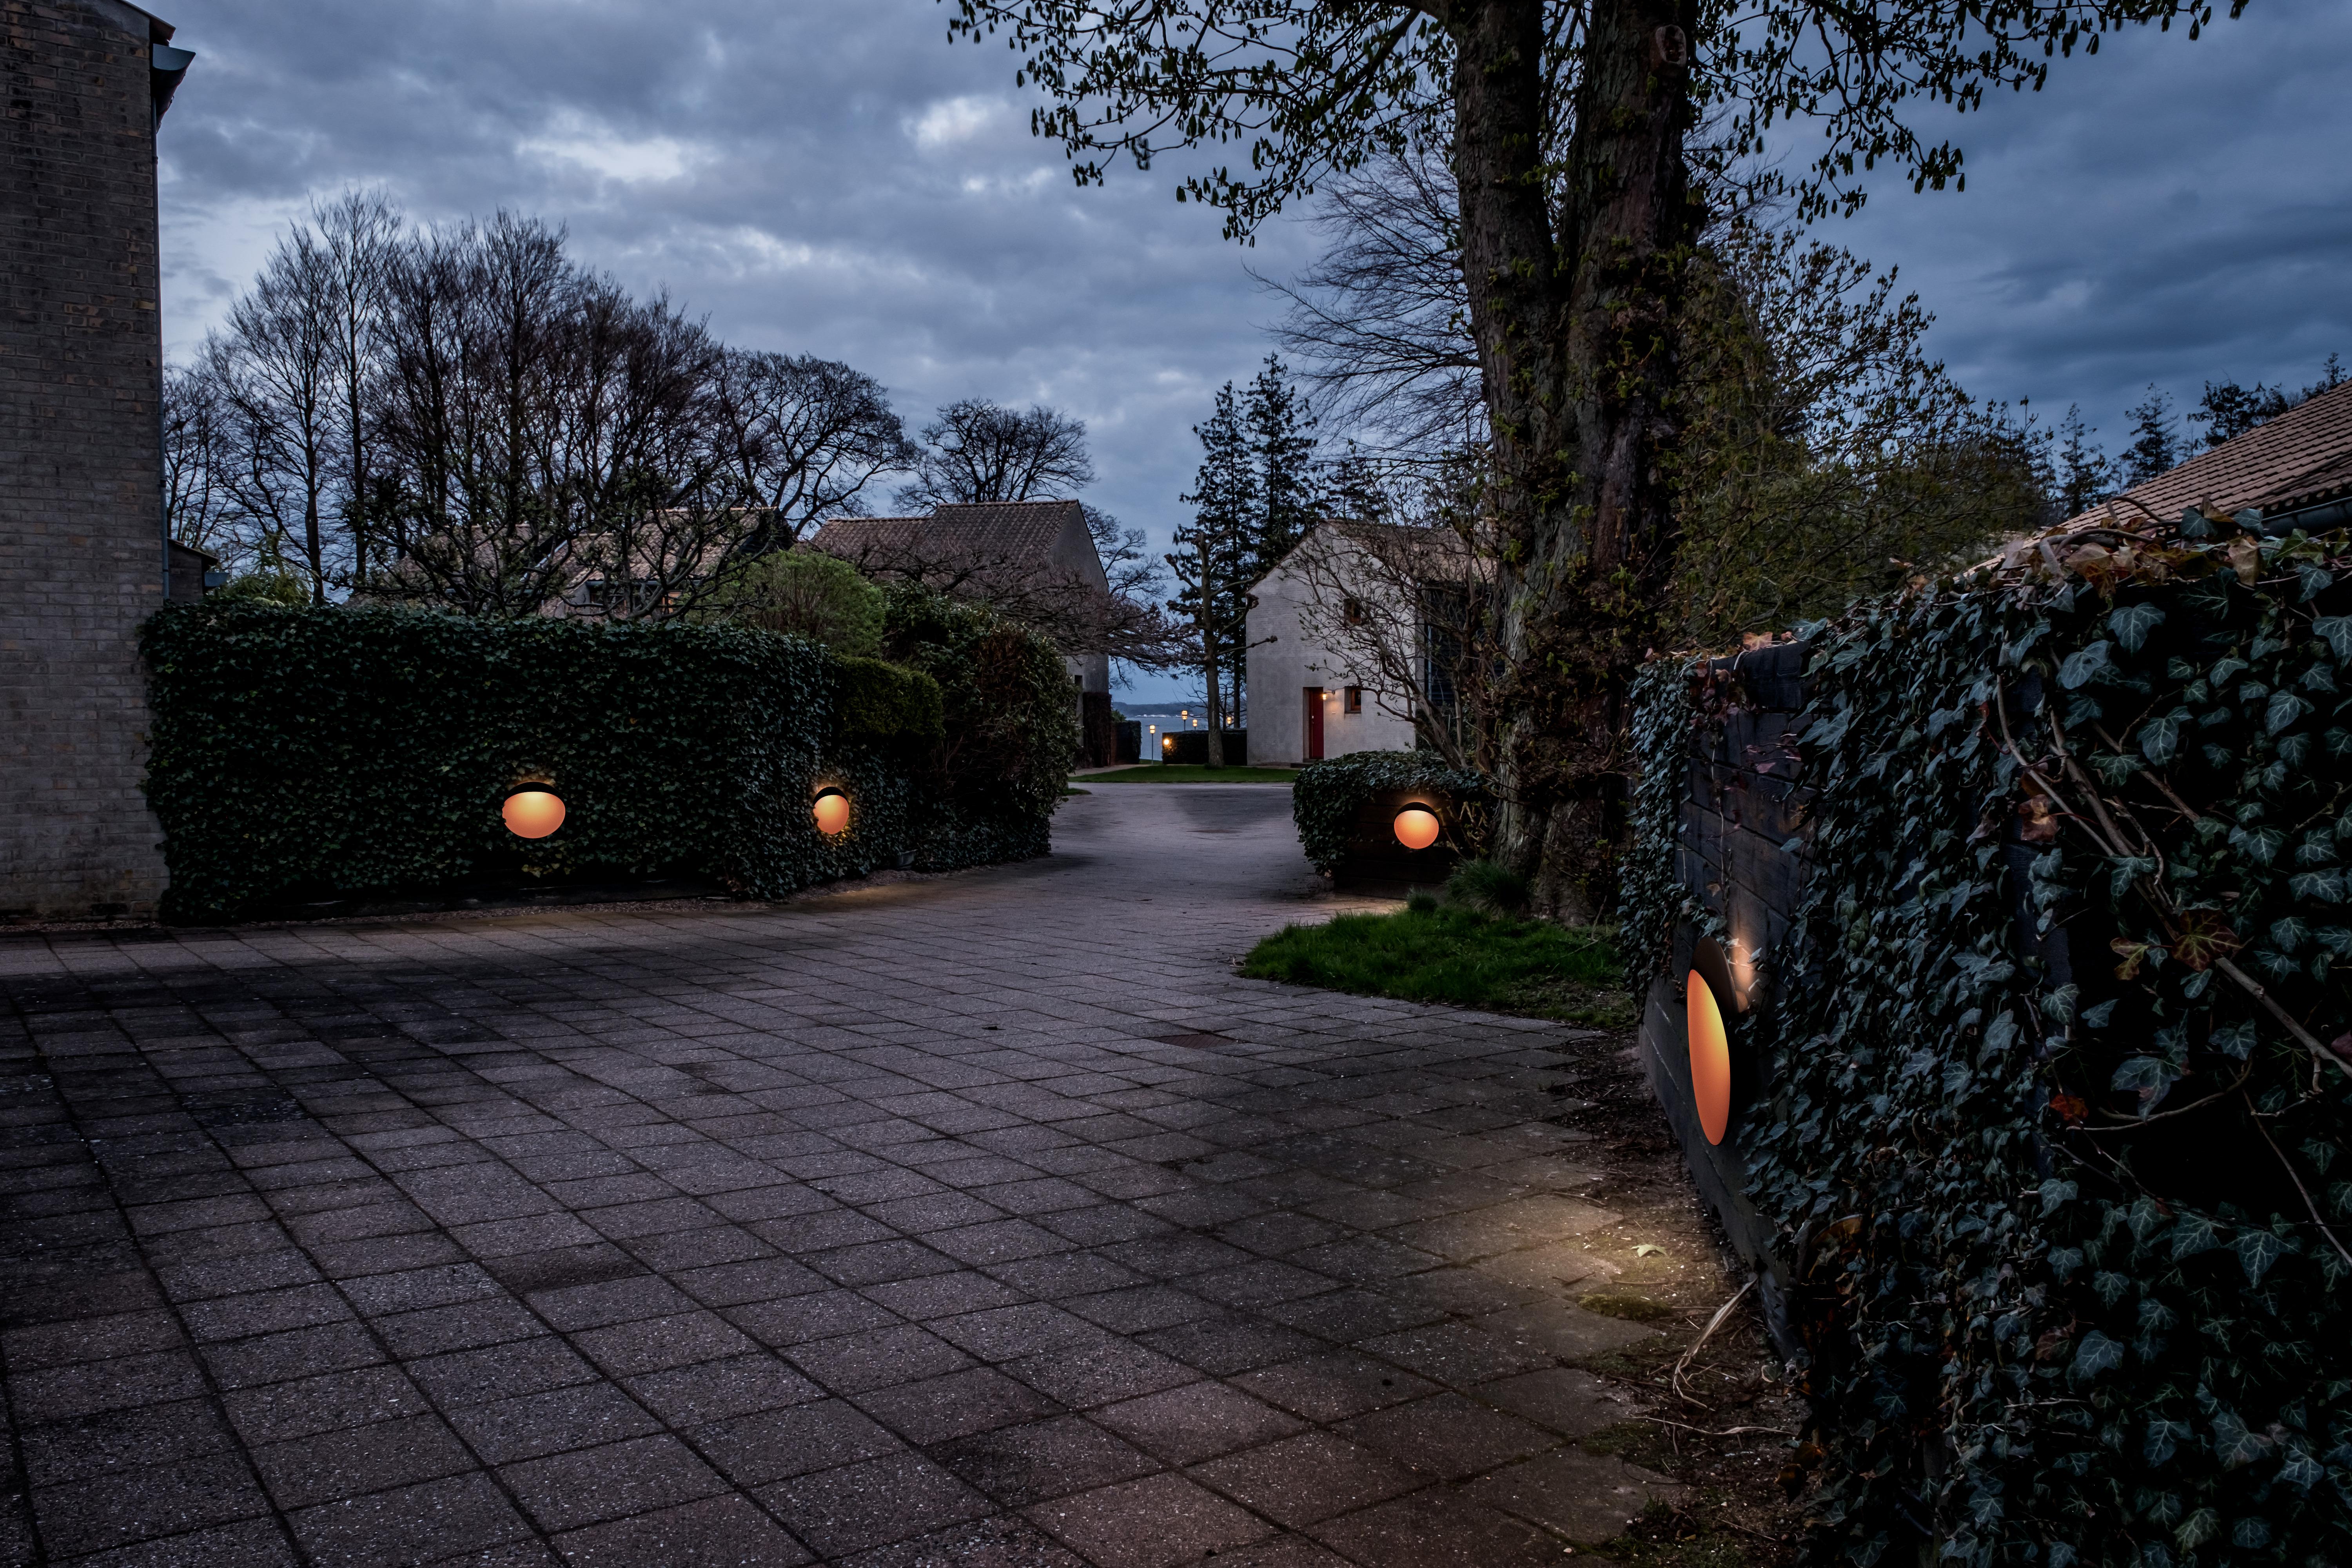 'Flindt' Indoor or Outdoor Wall Light in Black for Louis Poulsen.

A circular, wall-mounted fixture that brings bold, sculptural illumination to both indoor and outdoor spaces. The slim, elliptical lamp has a floating appearance that, paired with